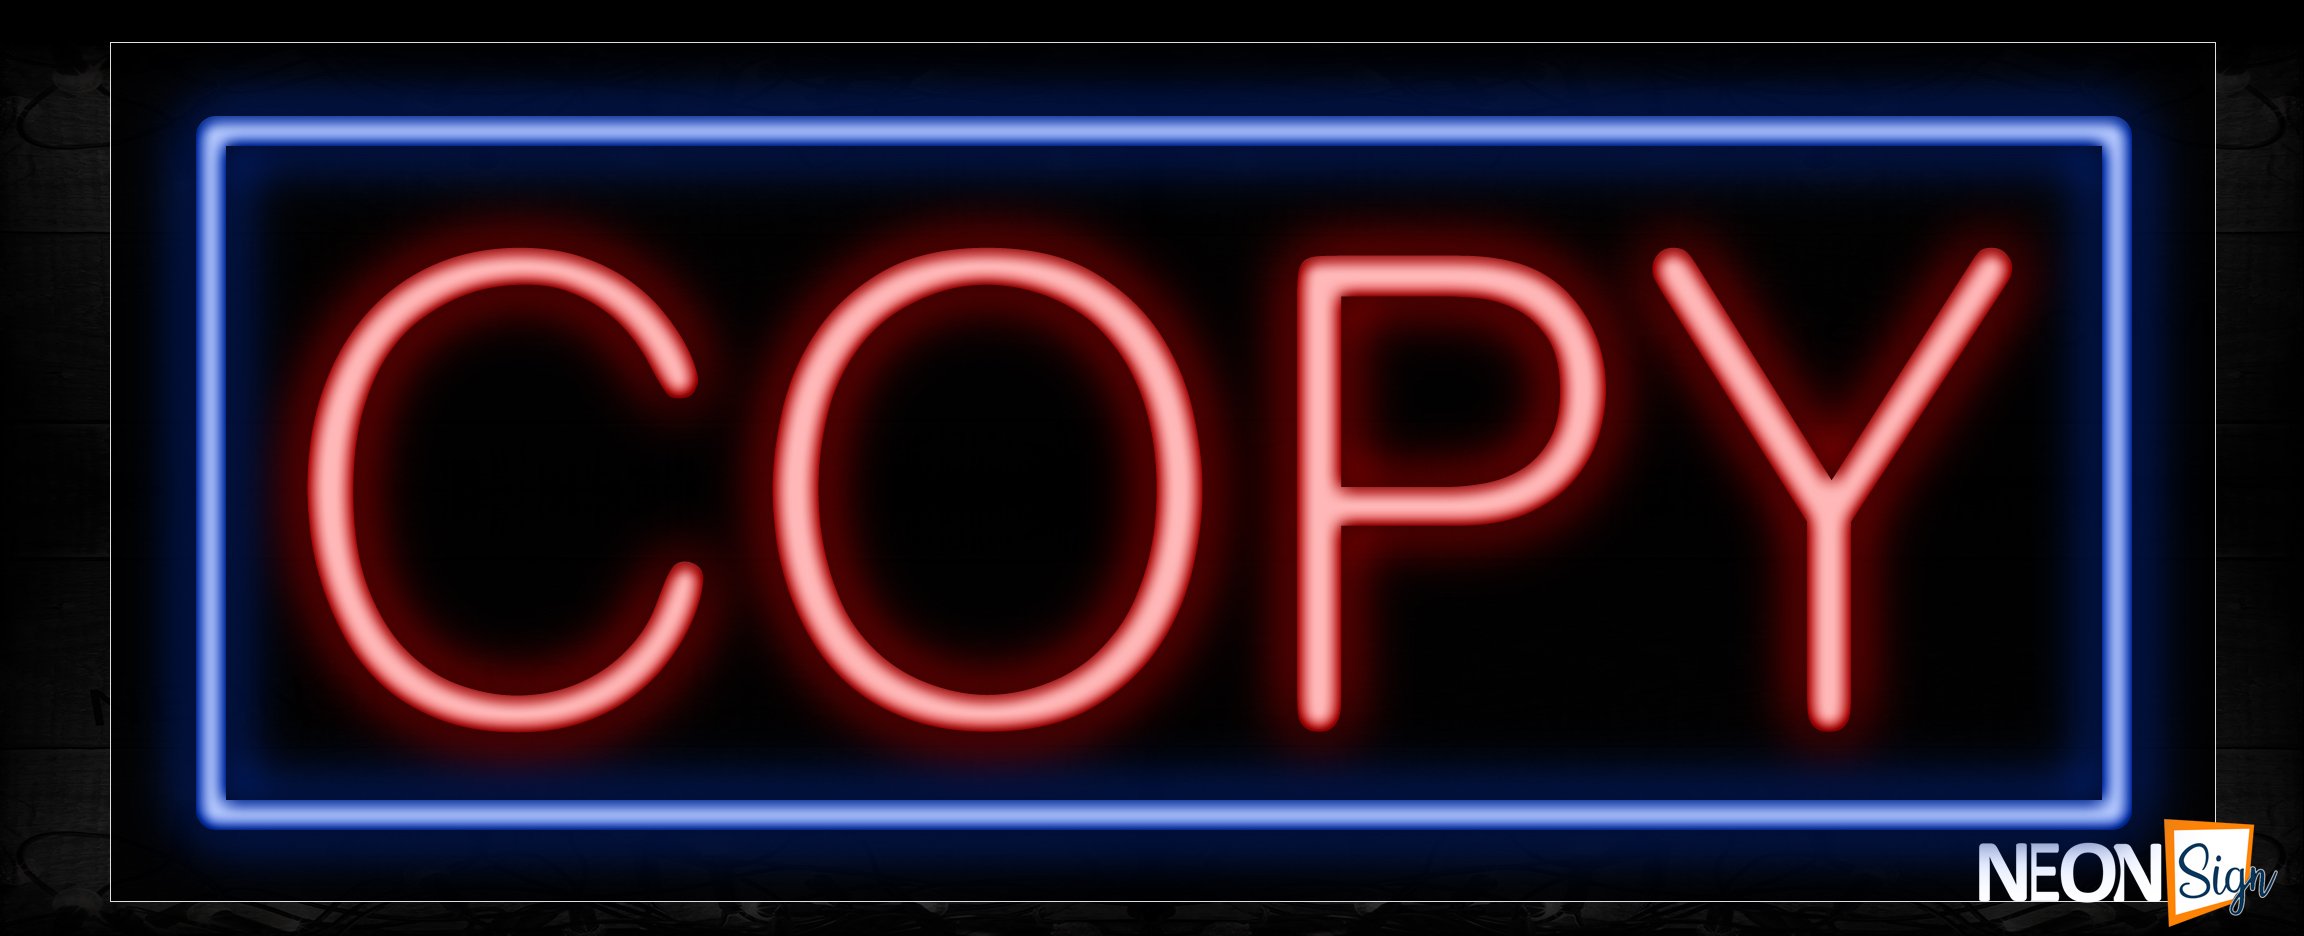 Image of 10044 Copy in red with blue border Neon Sign_13x32 Black Backing